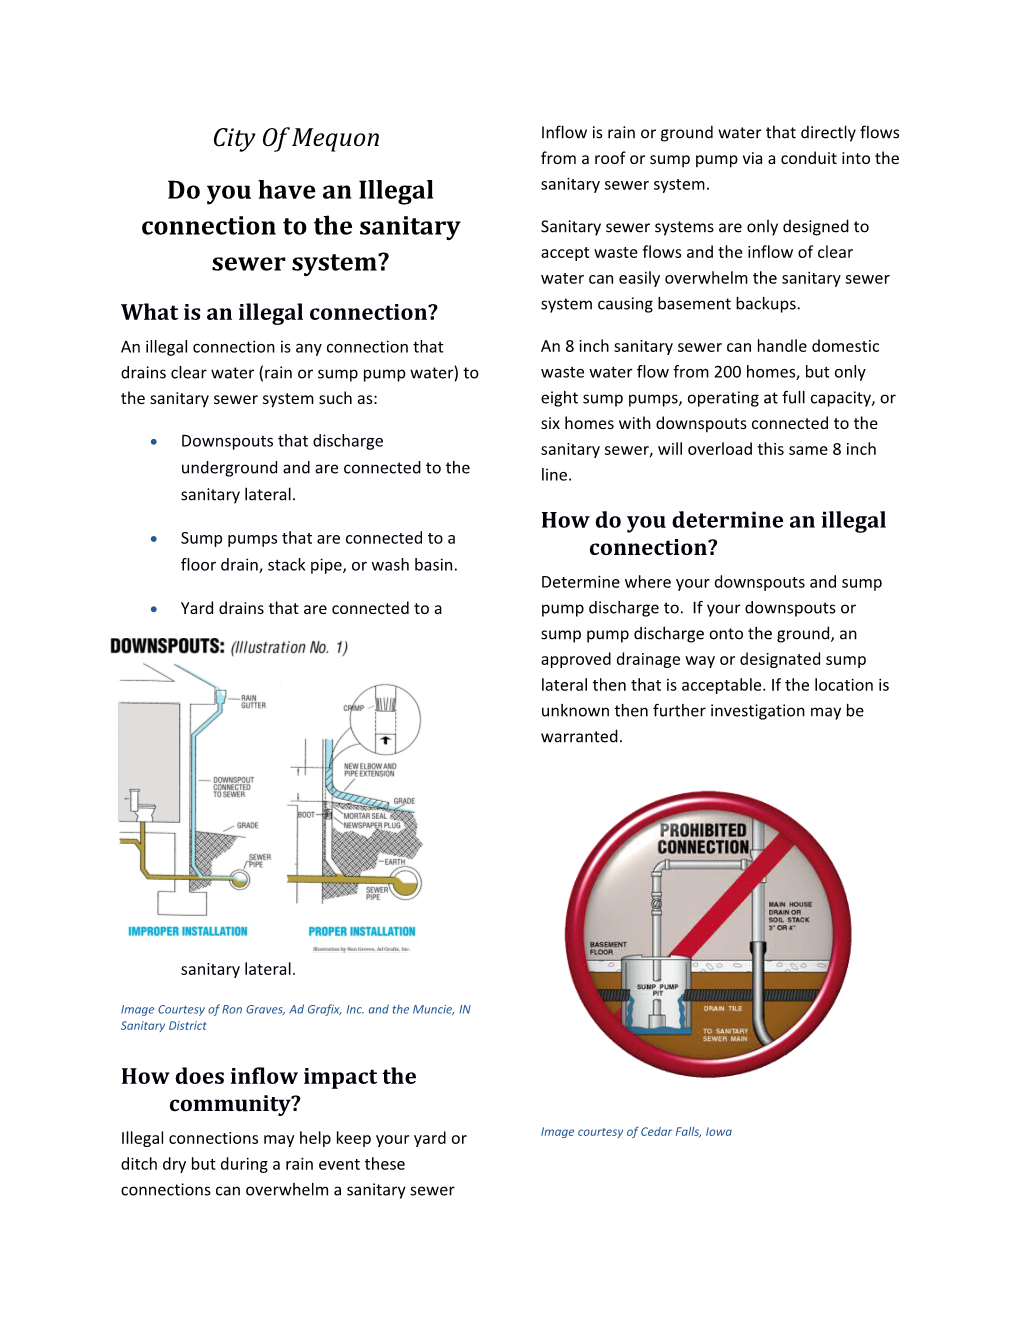 Do You Have an Illegal Connection to the Sanitary Sewer System?